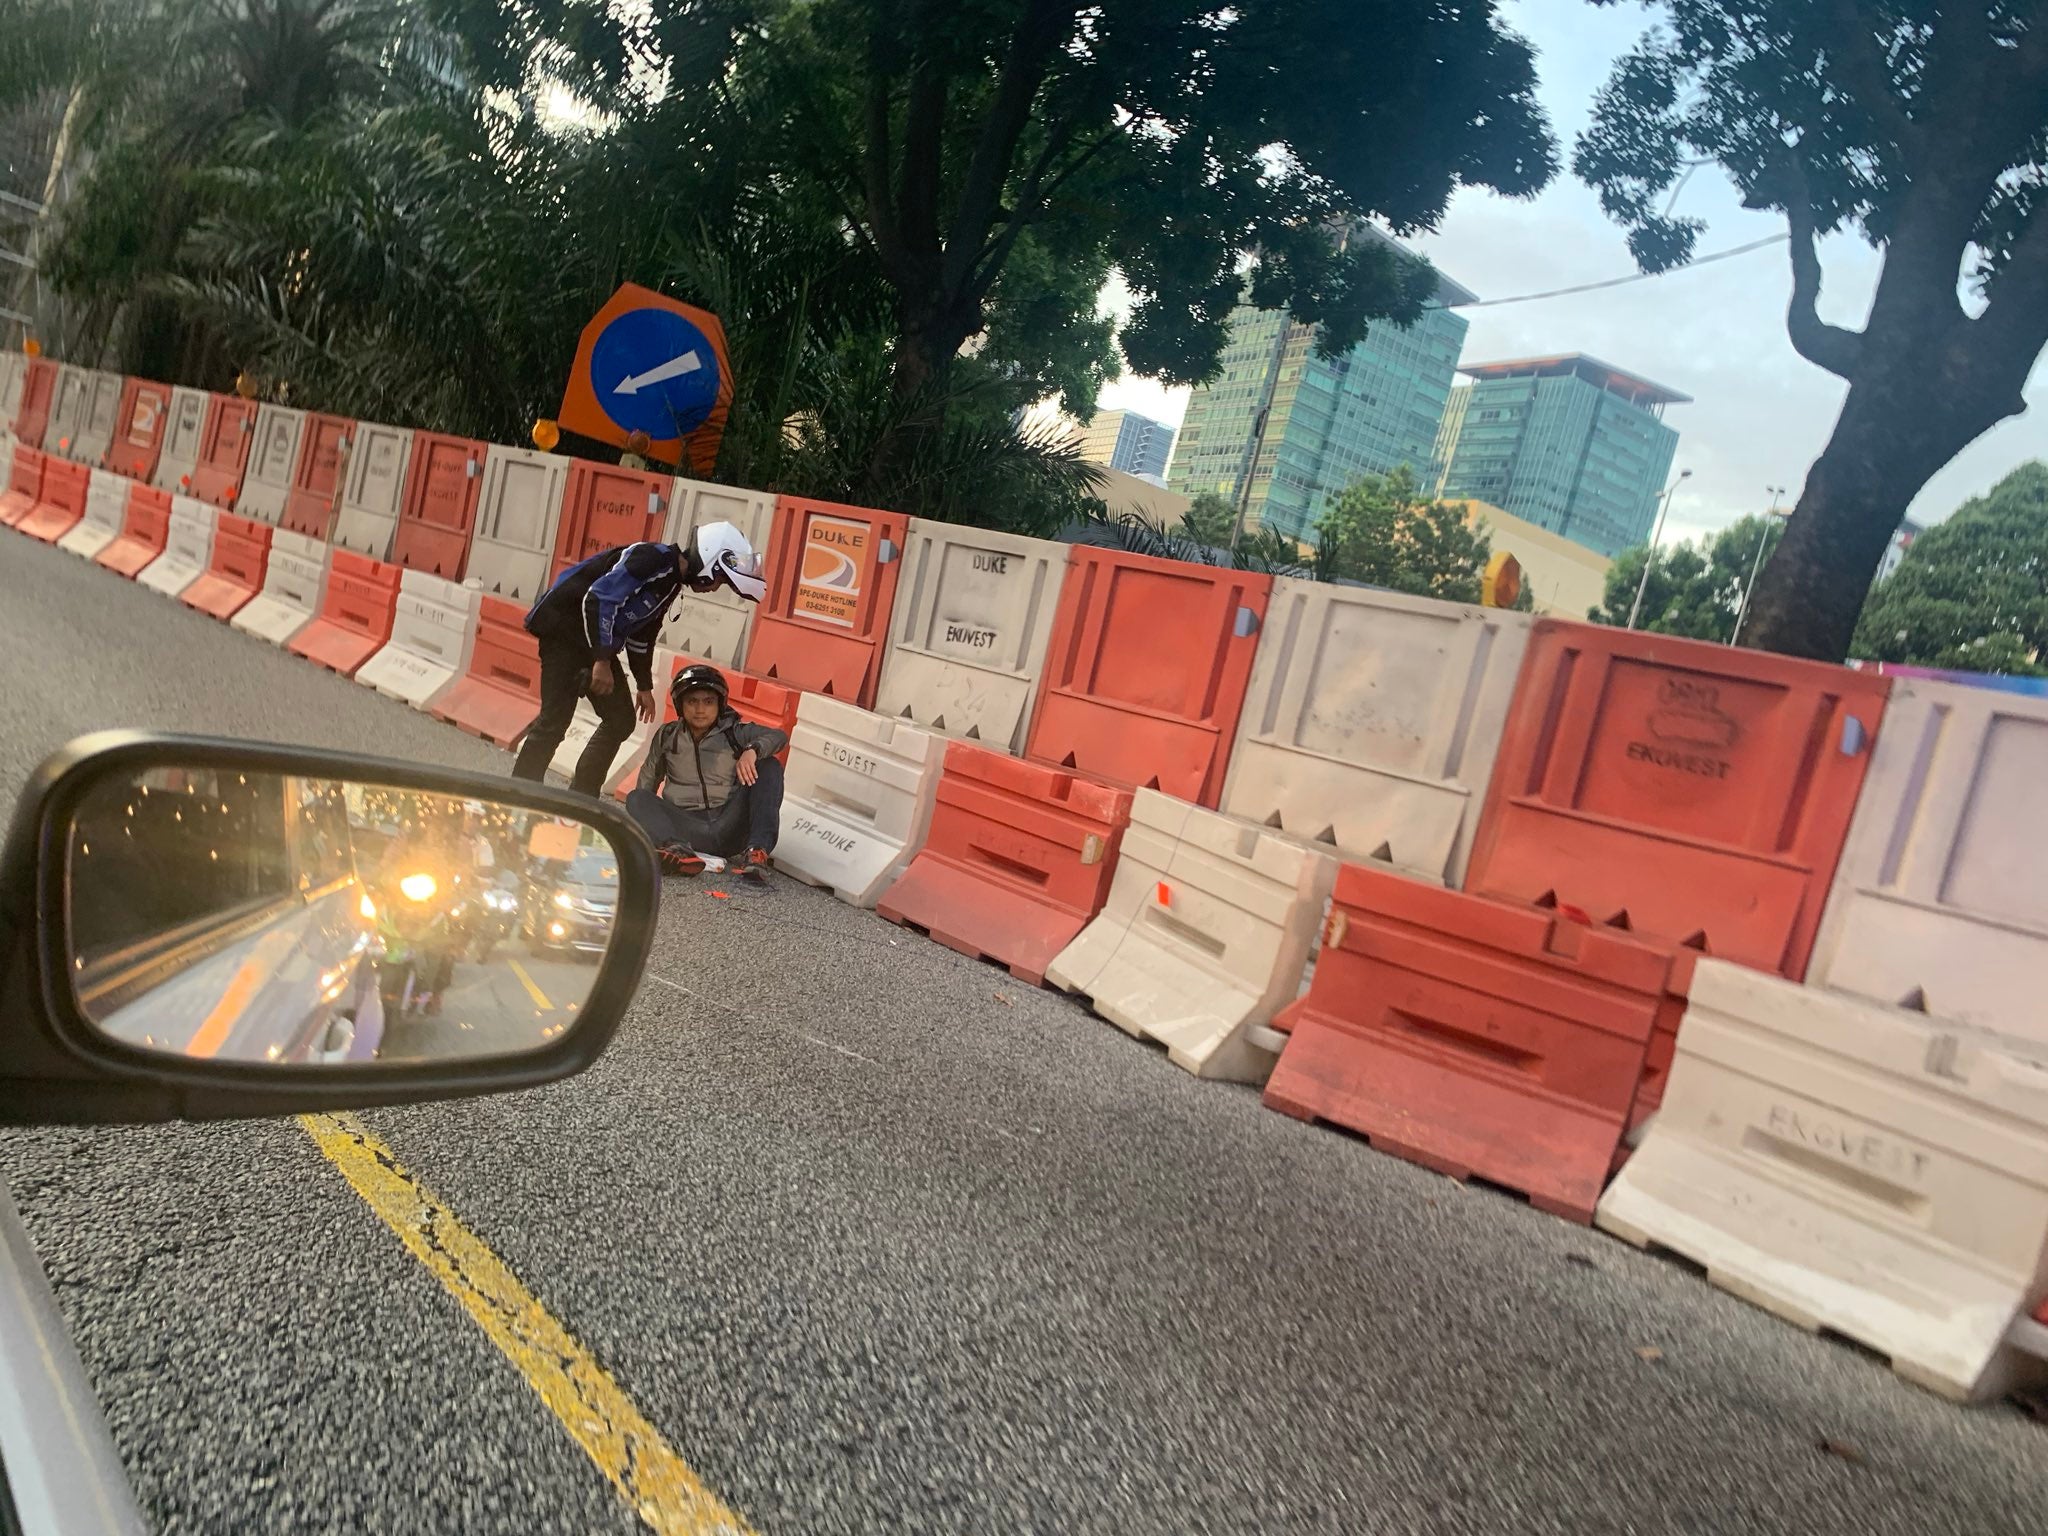 M'sian Motorcyclist Forced Off Road, Gets Into Accident To Make Room For VVIP Escorts - WORLD OF BUZZ 2